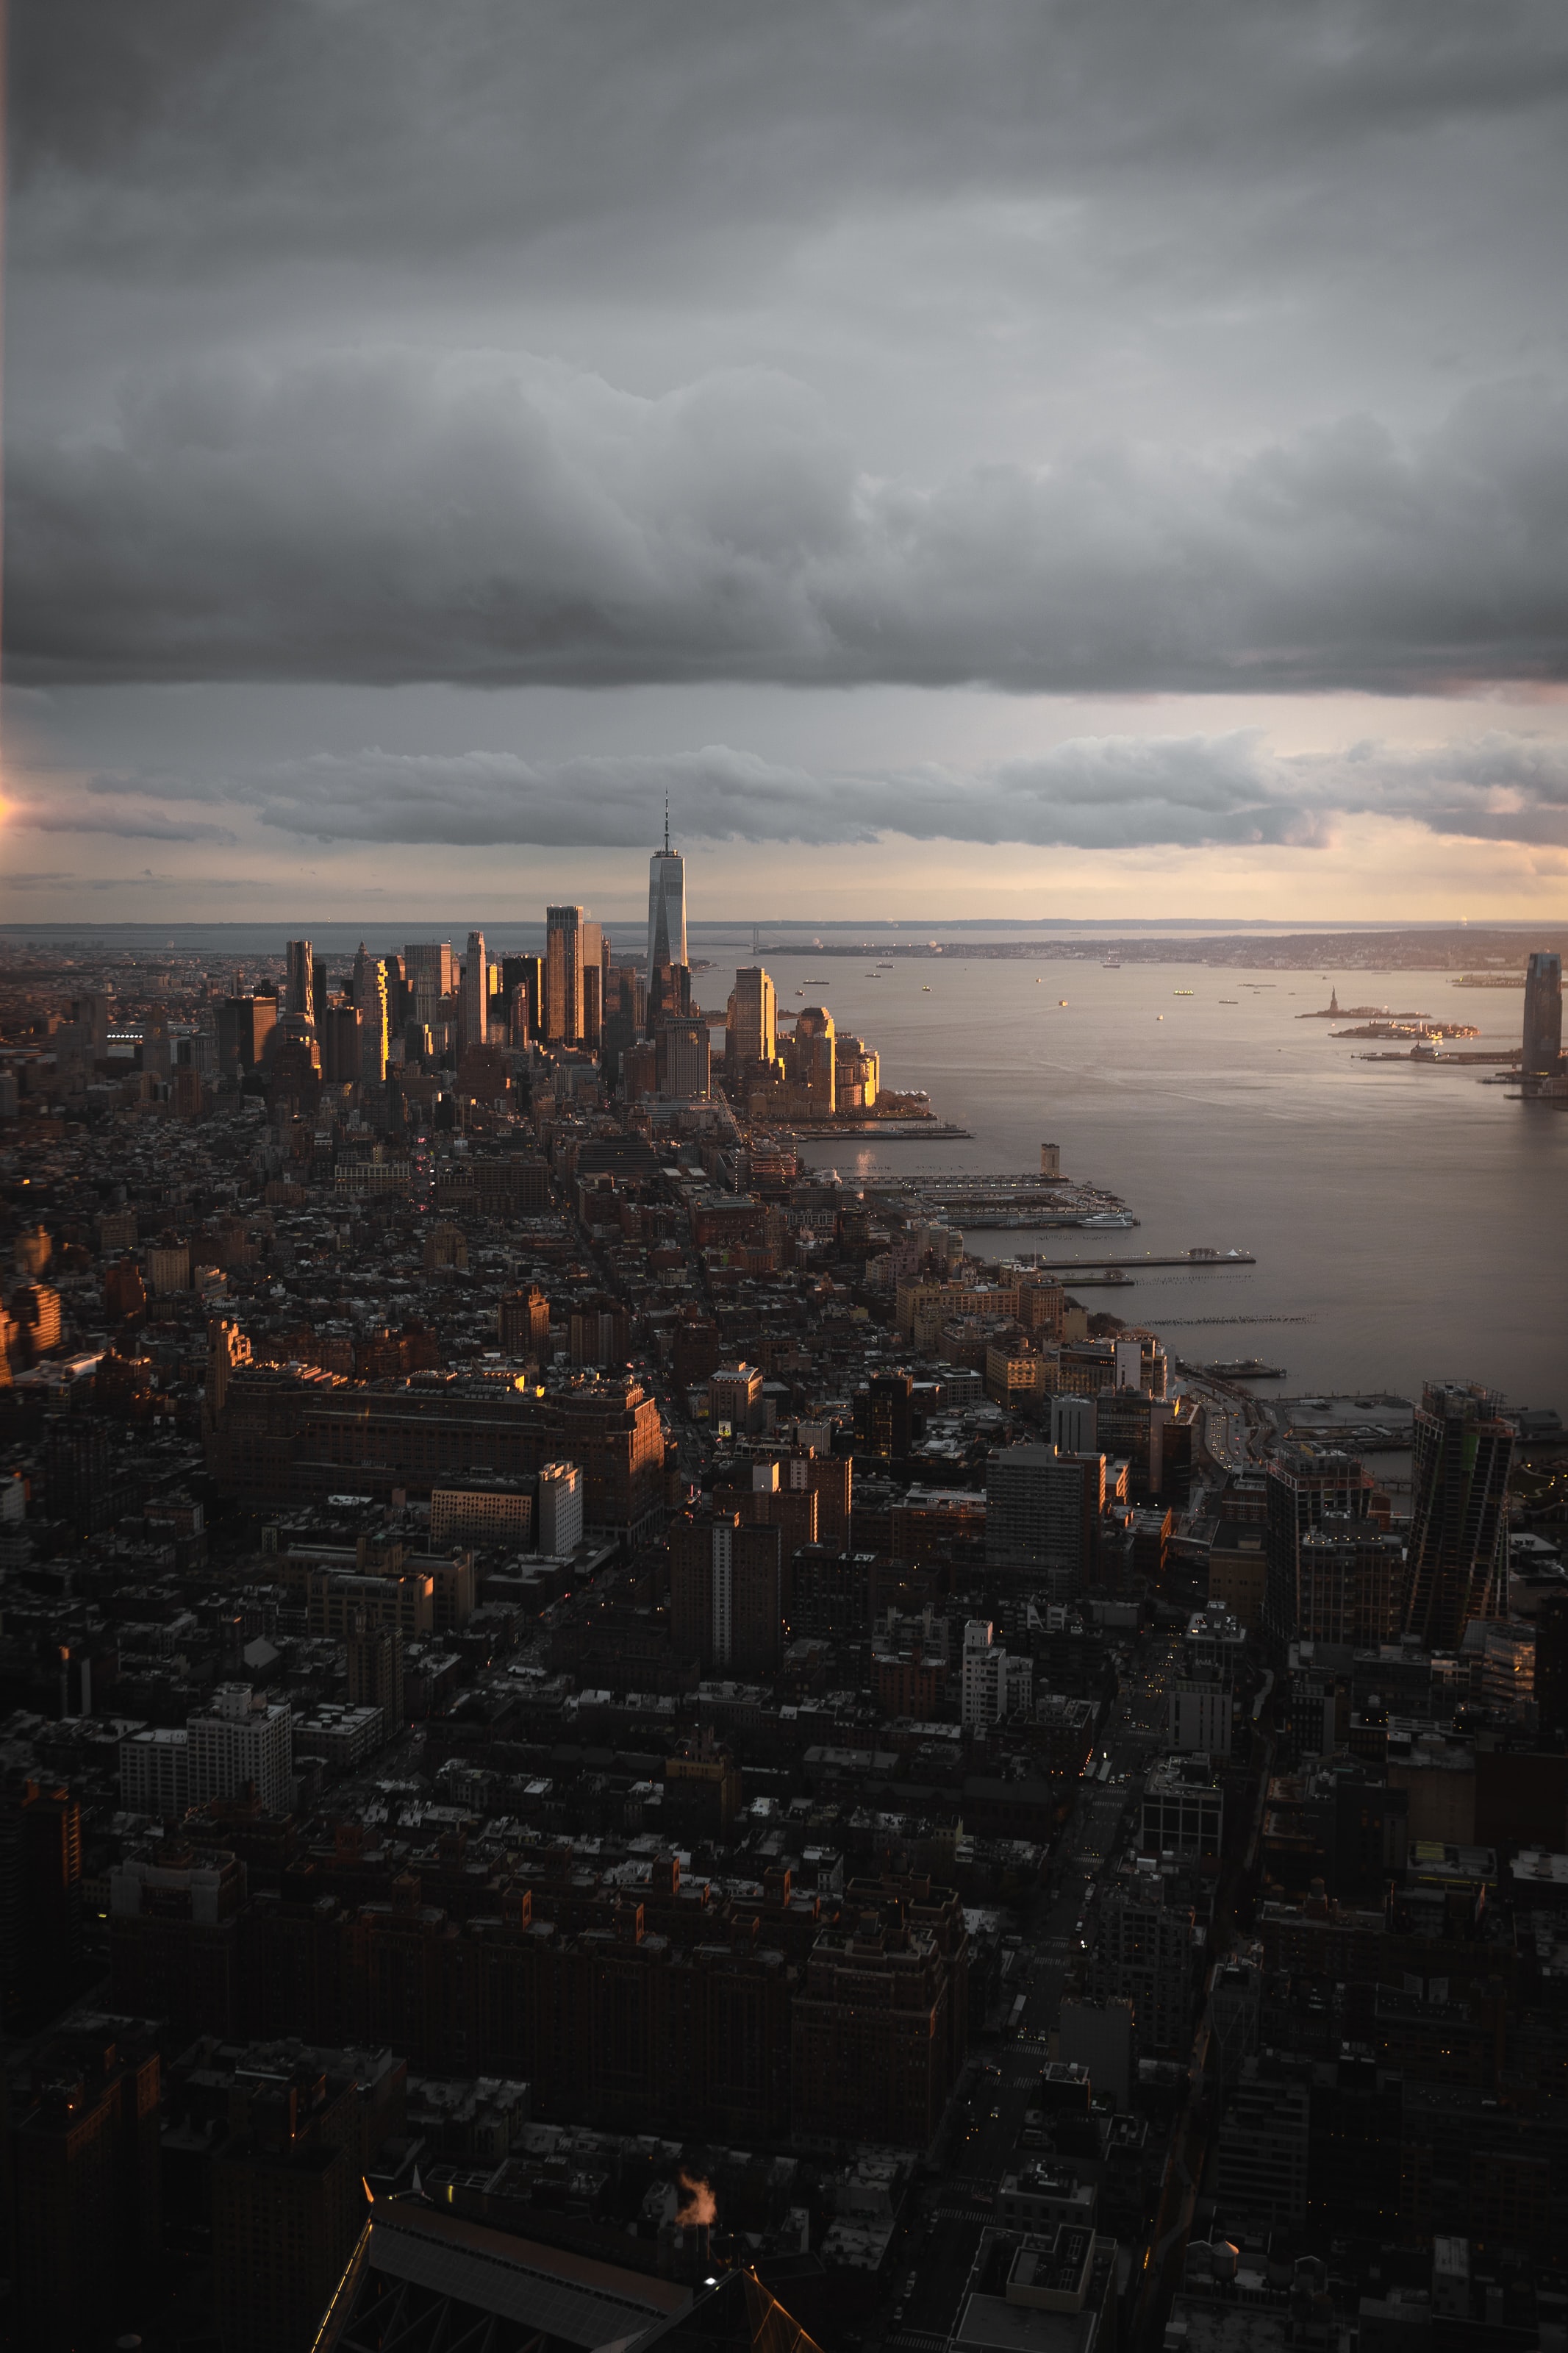 Widescreen image view from above, dusk, cities, building